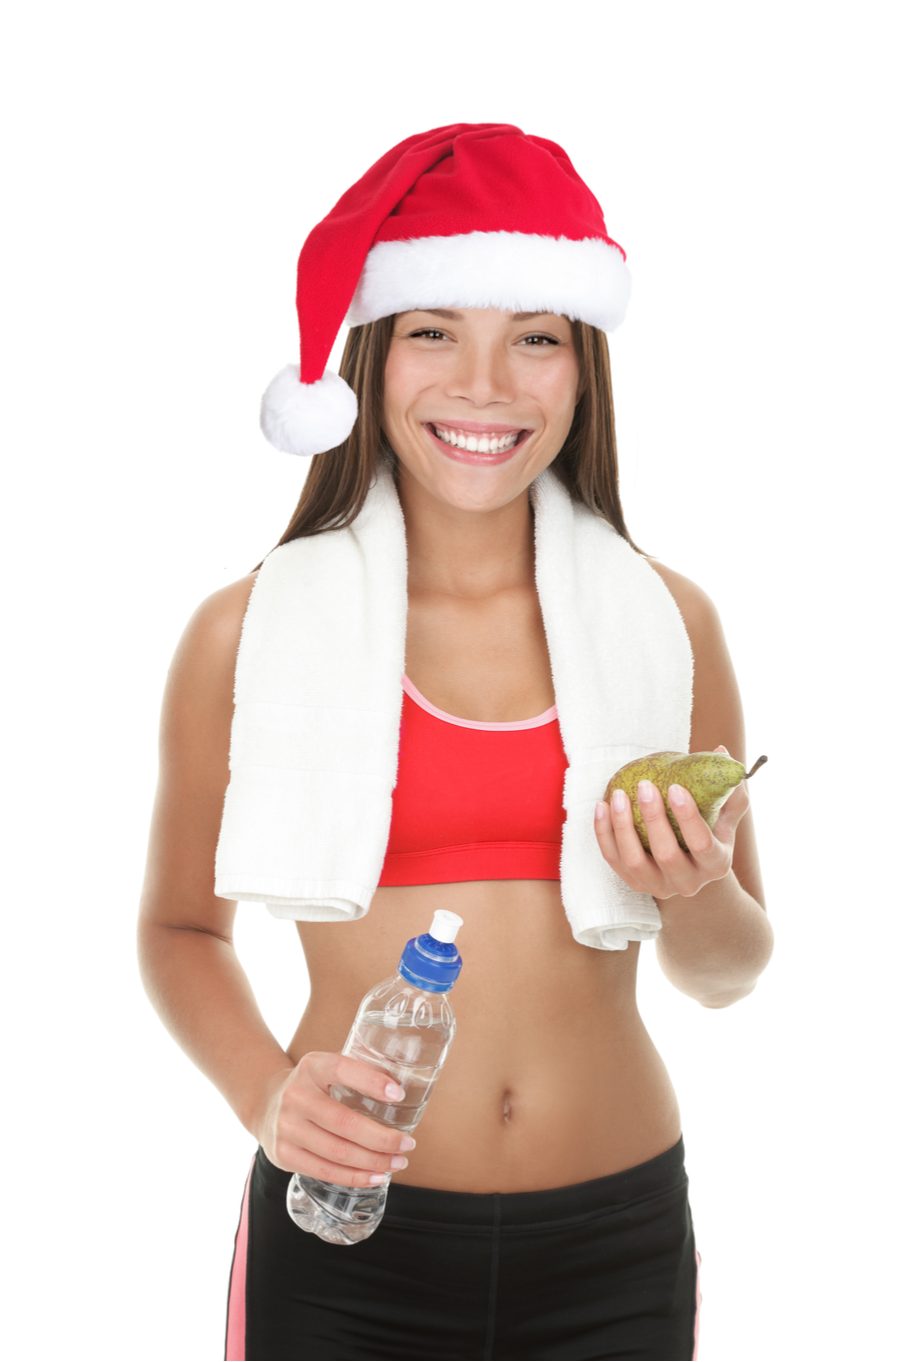 Are You Getting Fabulously Fit For The Festive Season?